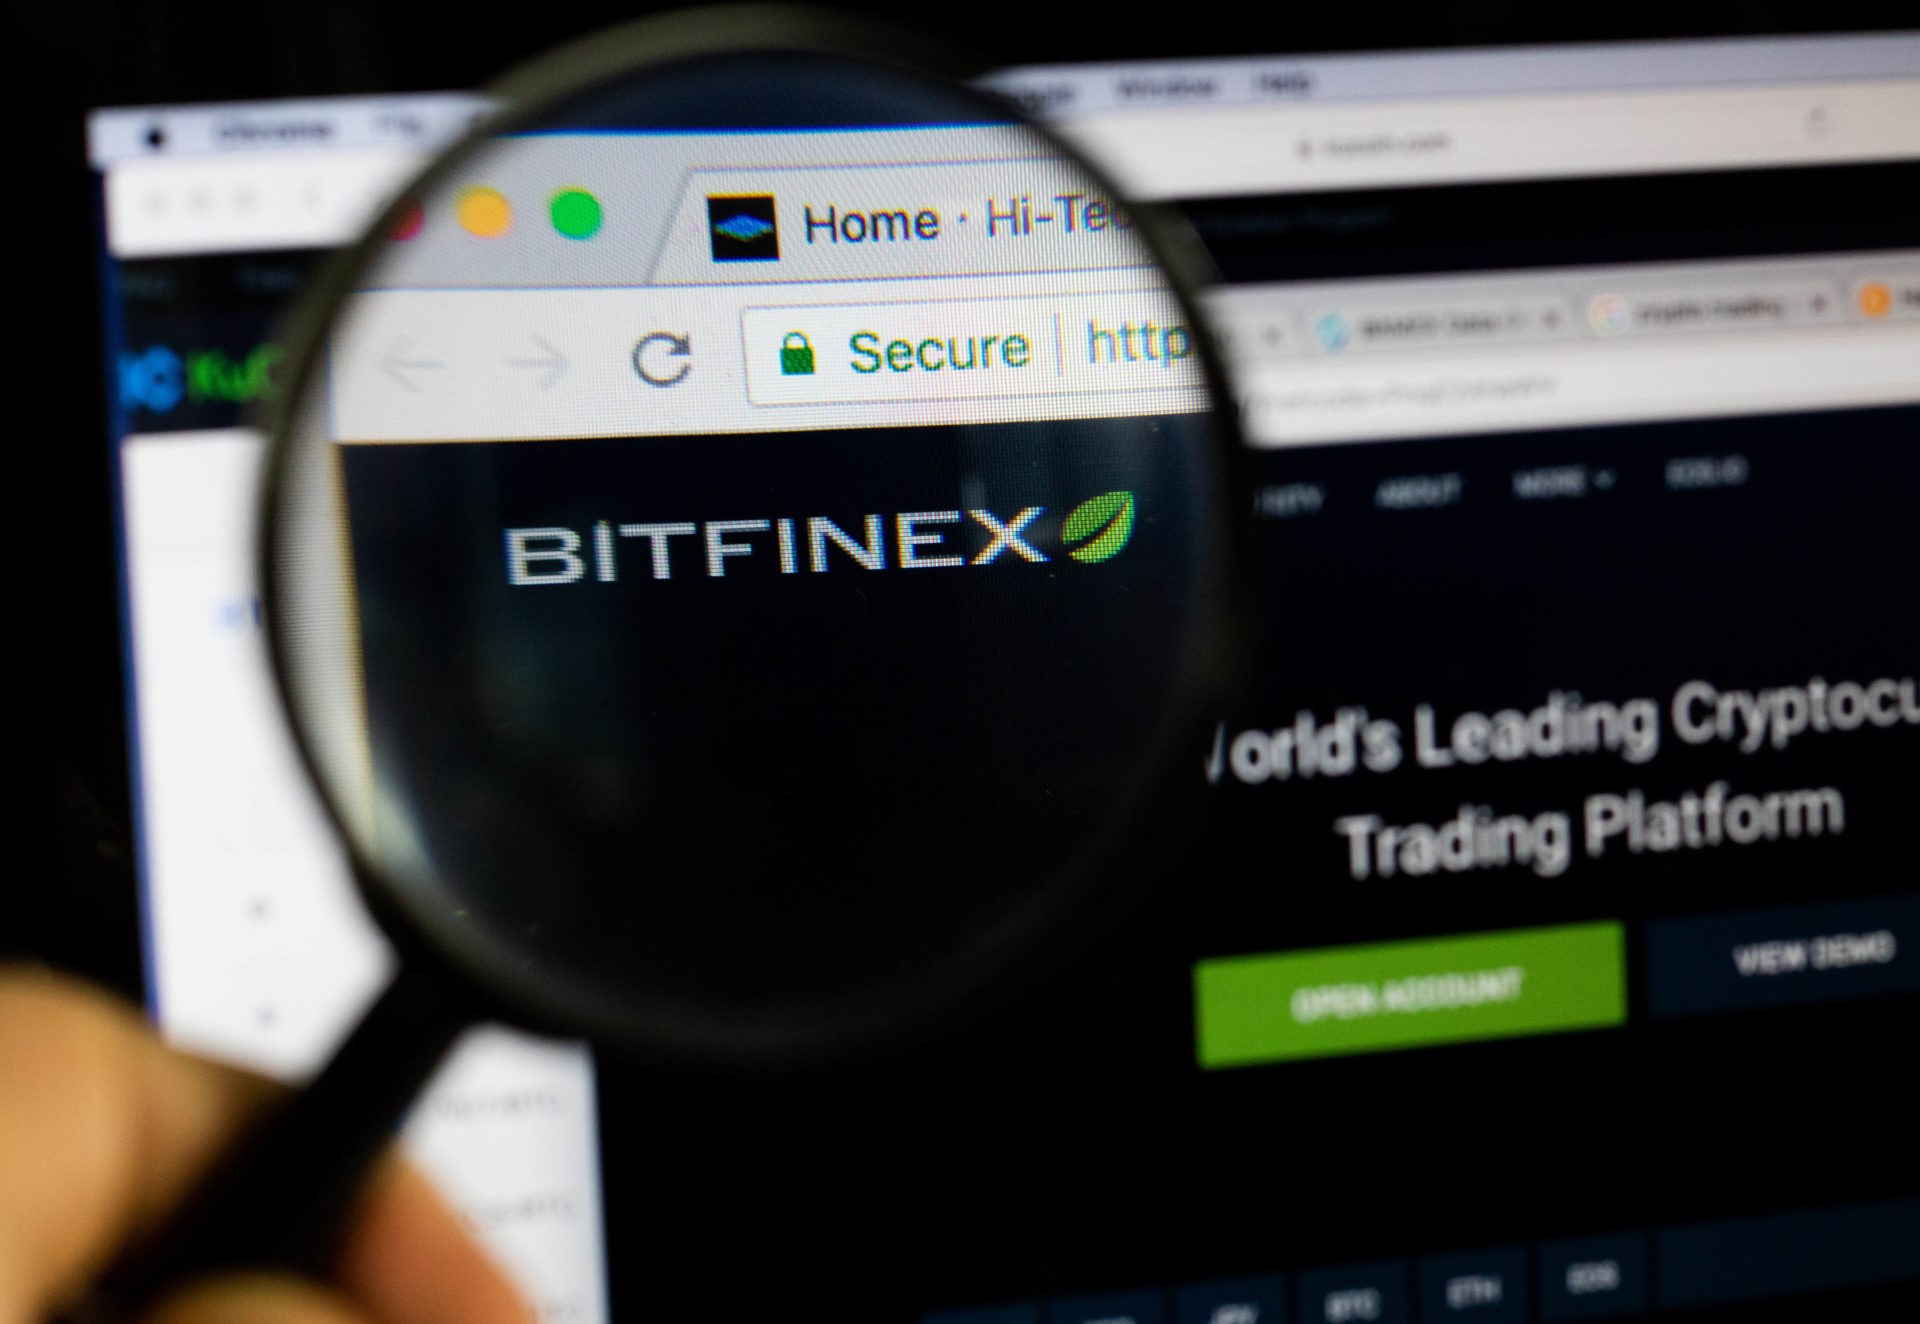 Breaking: Bitcoin Giant Bitfinex Sees Unexplained "Service Disruption" 13